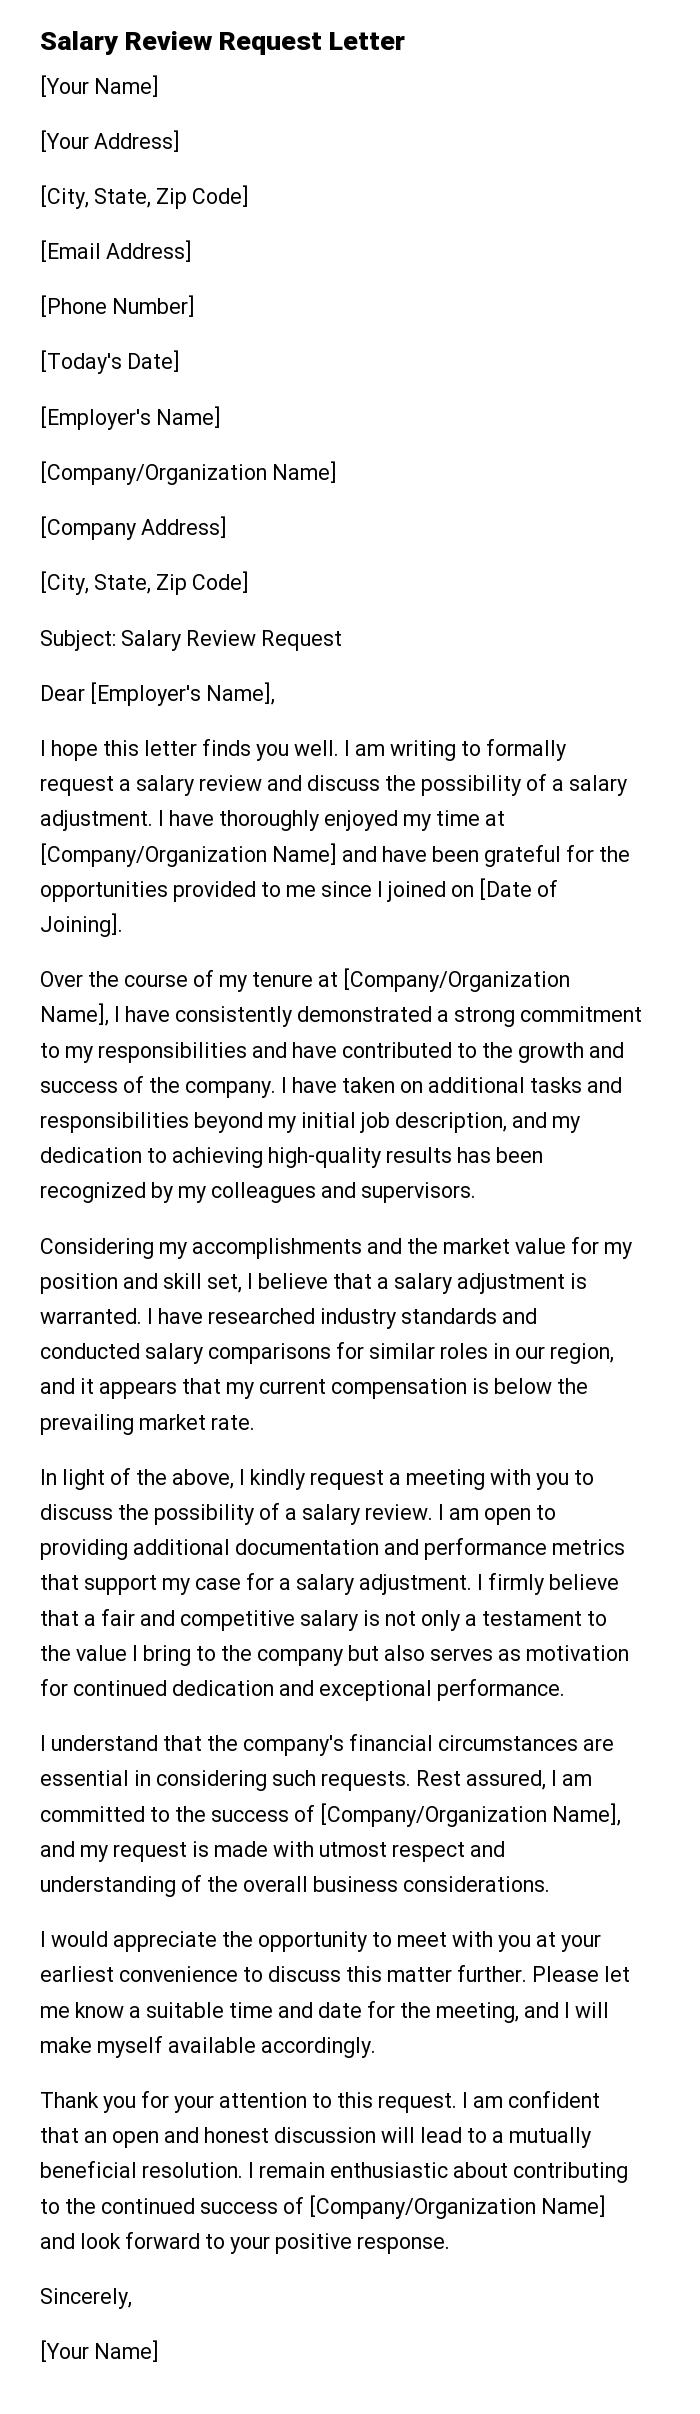 Salary Review Request Letter